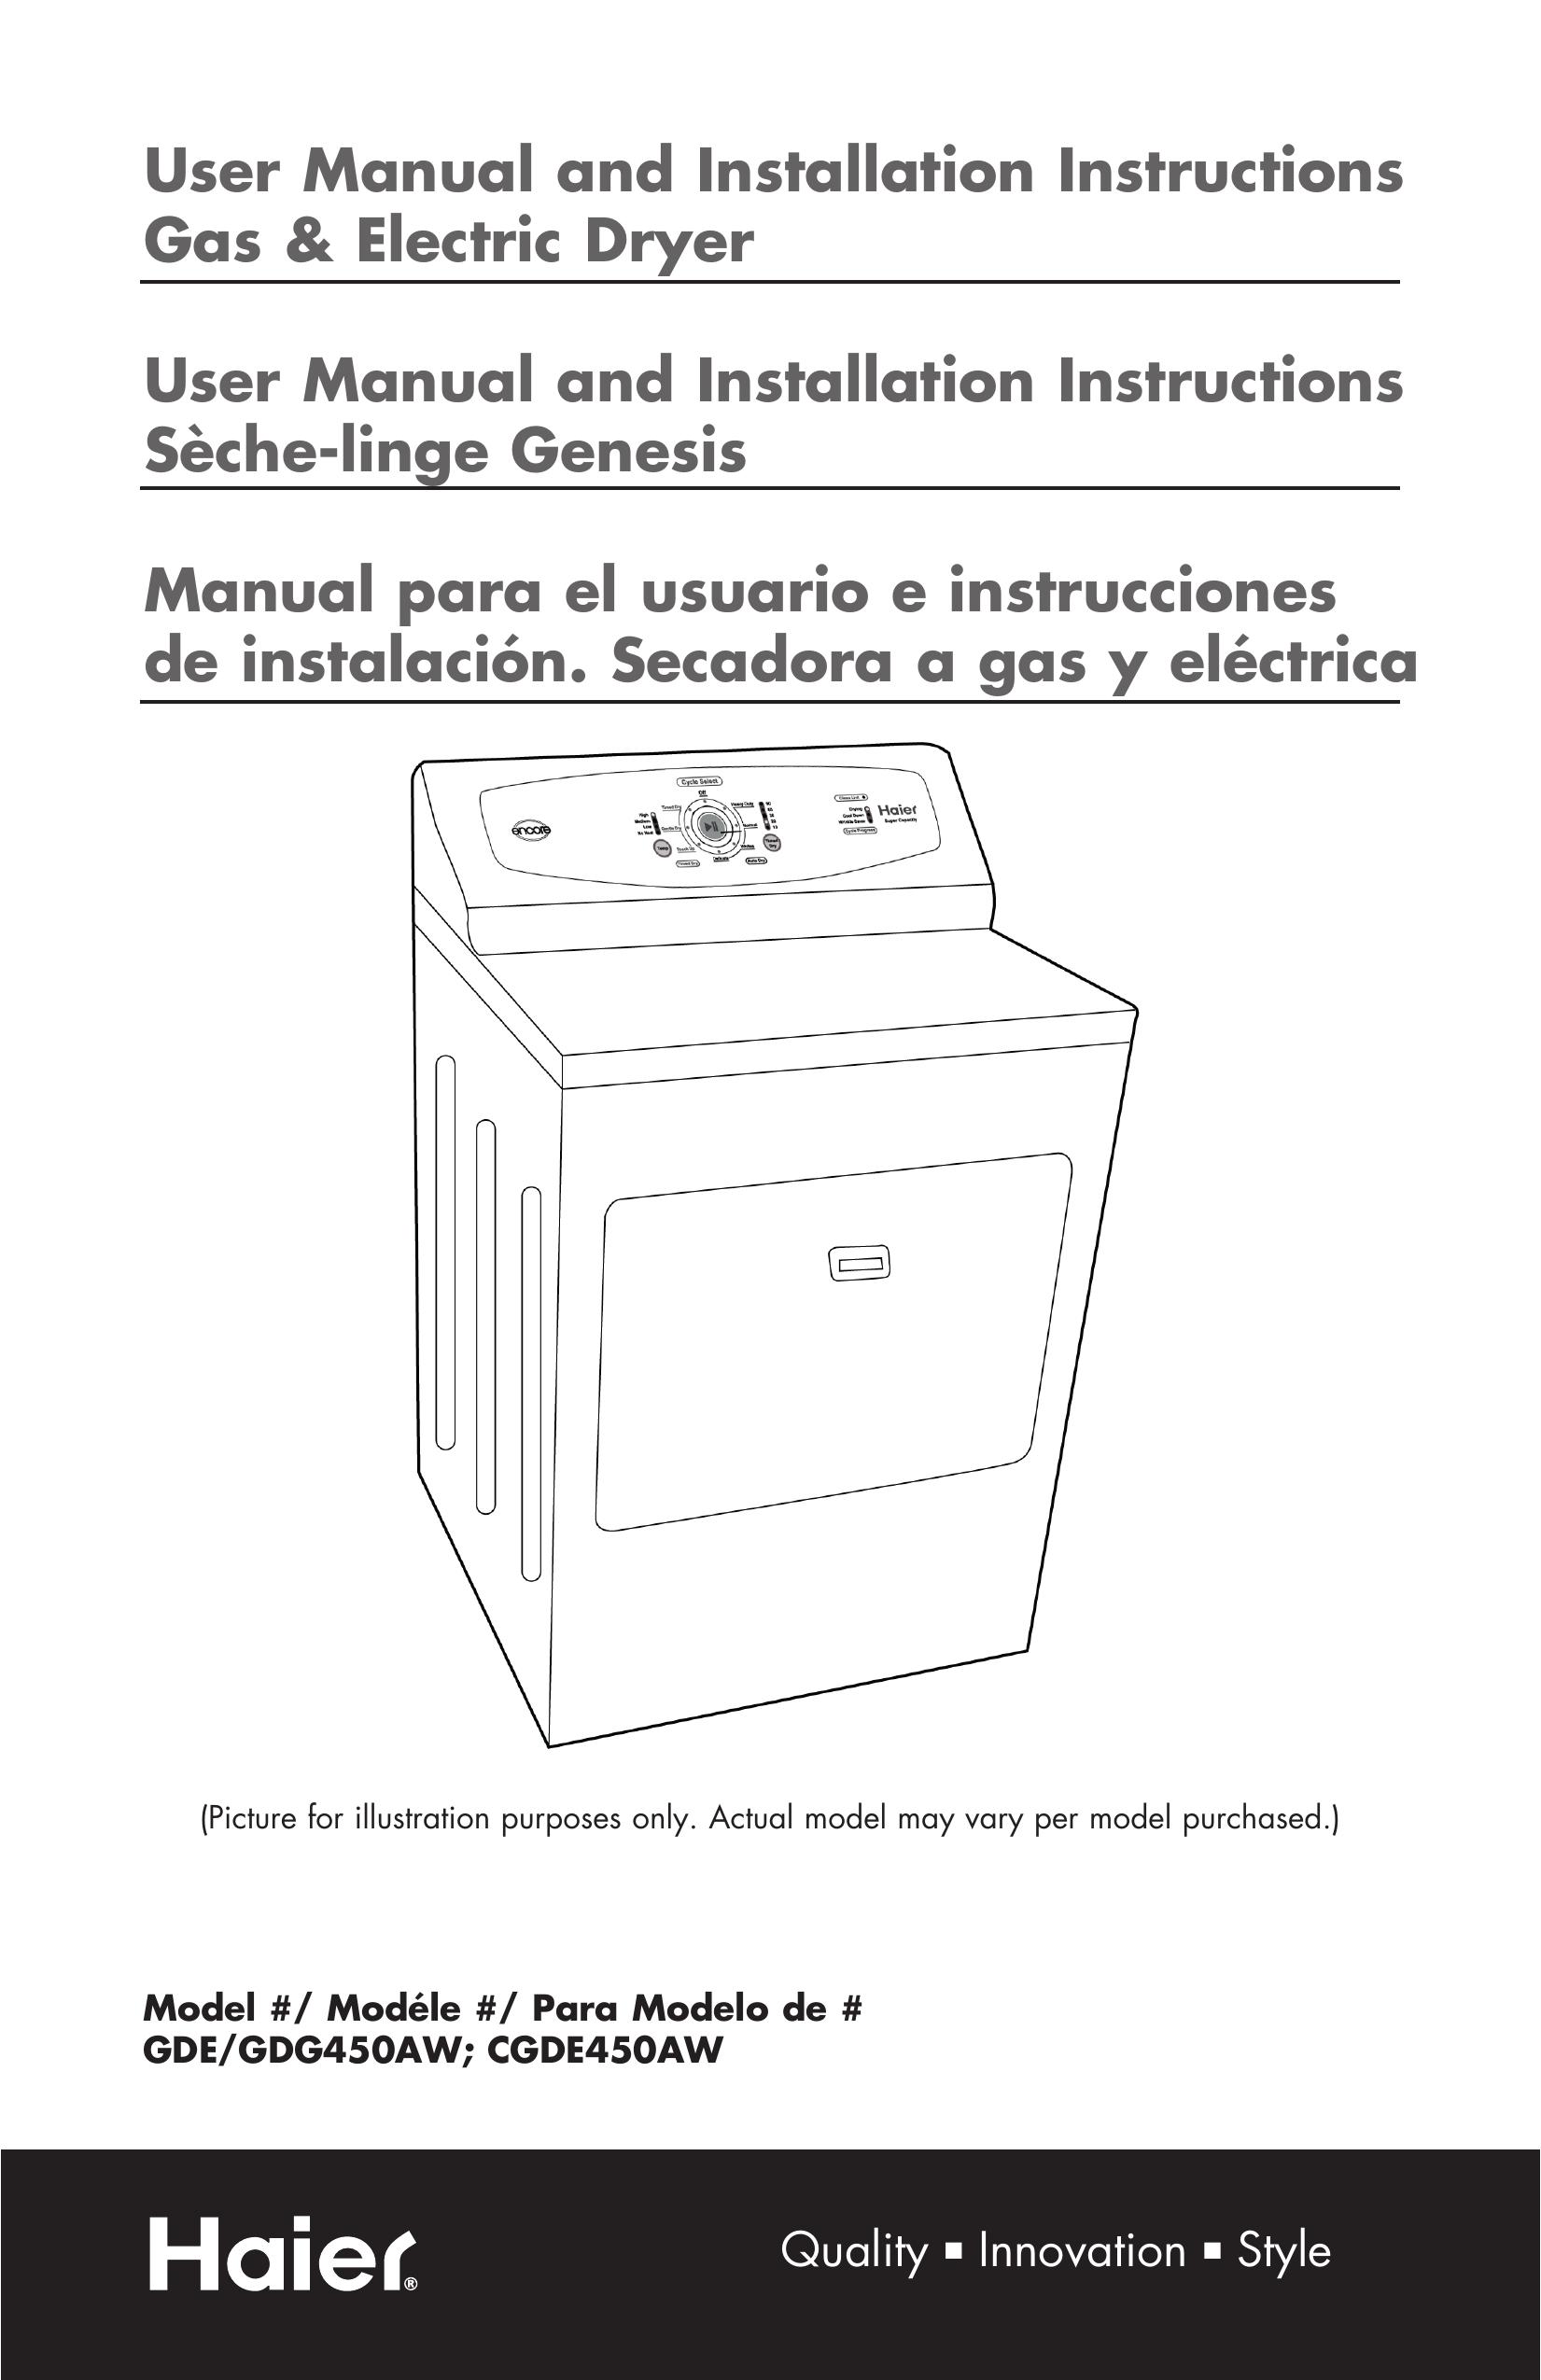 Haier GDE/GDG450AW Clothes Dryer User Manual